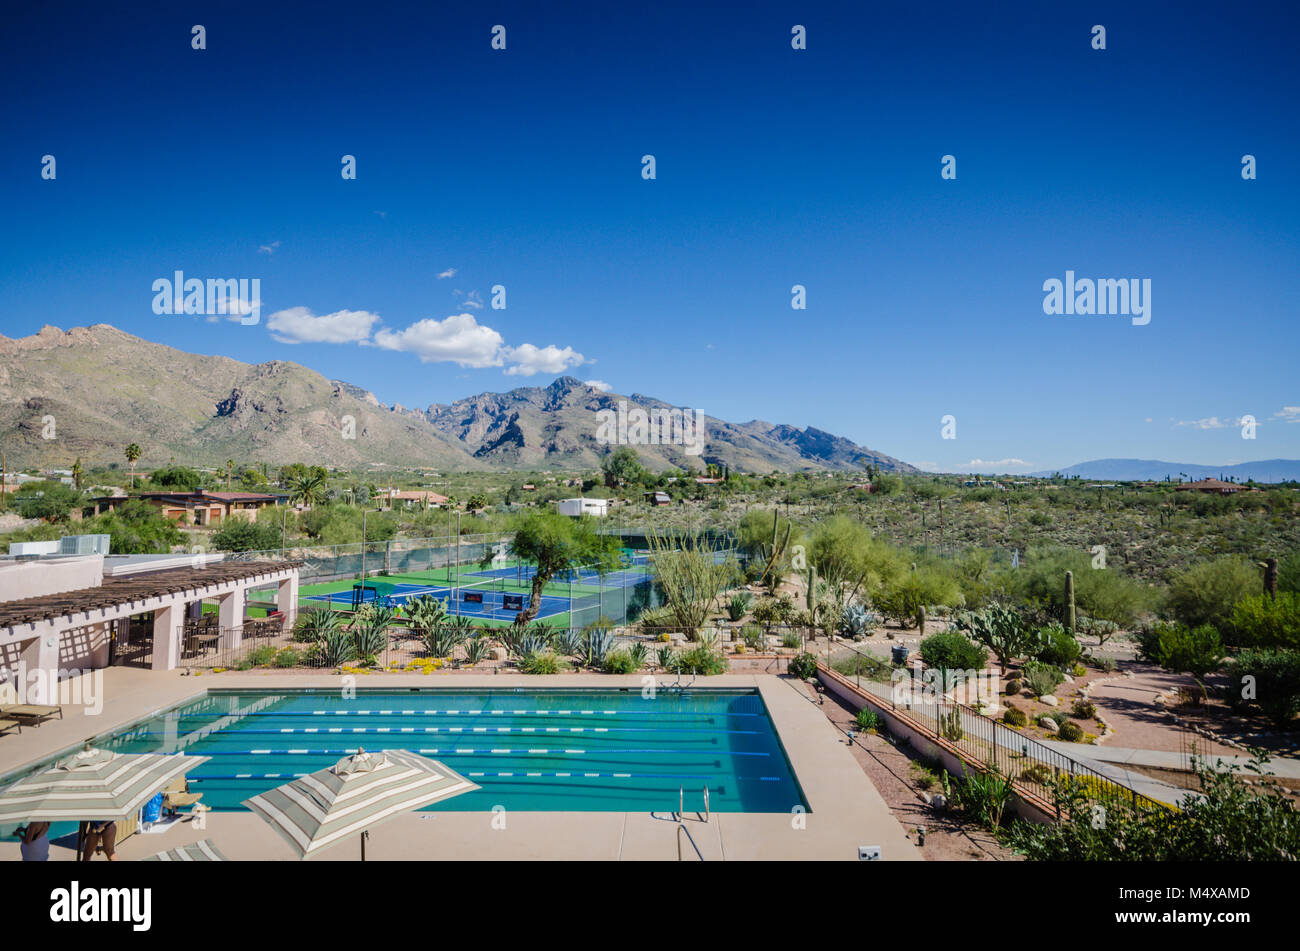 Olympic size pool and tennis courts at beautiful resort with view of Rincon Mountains near Saguaro National Park and Tucson, Arizona. Stock Photo